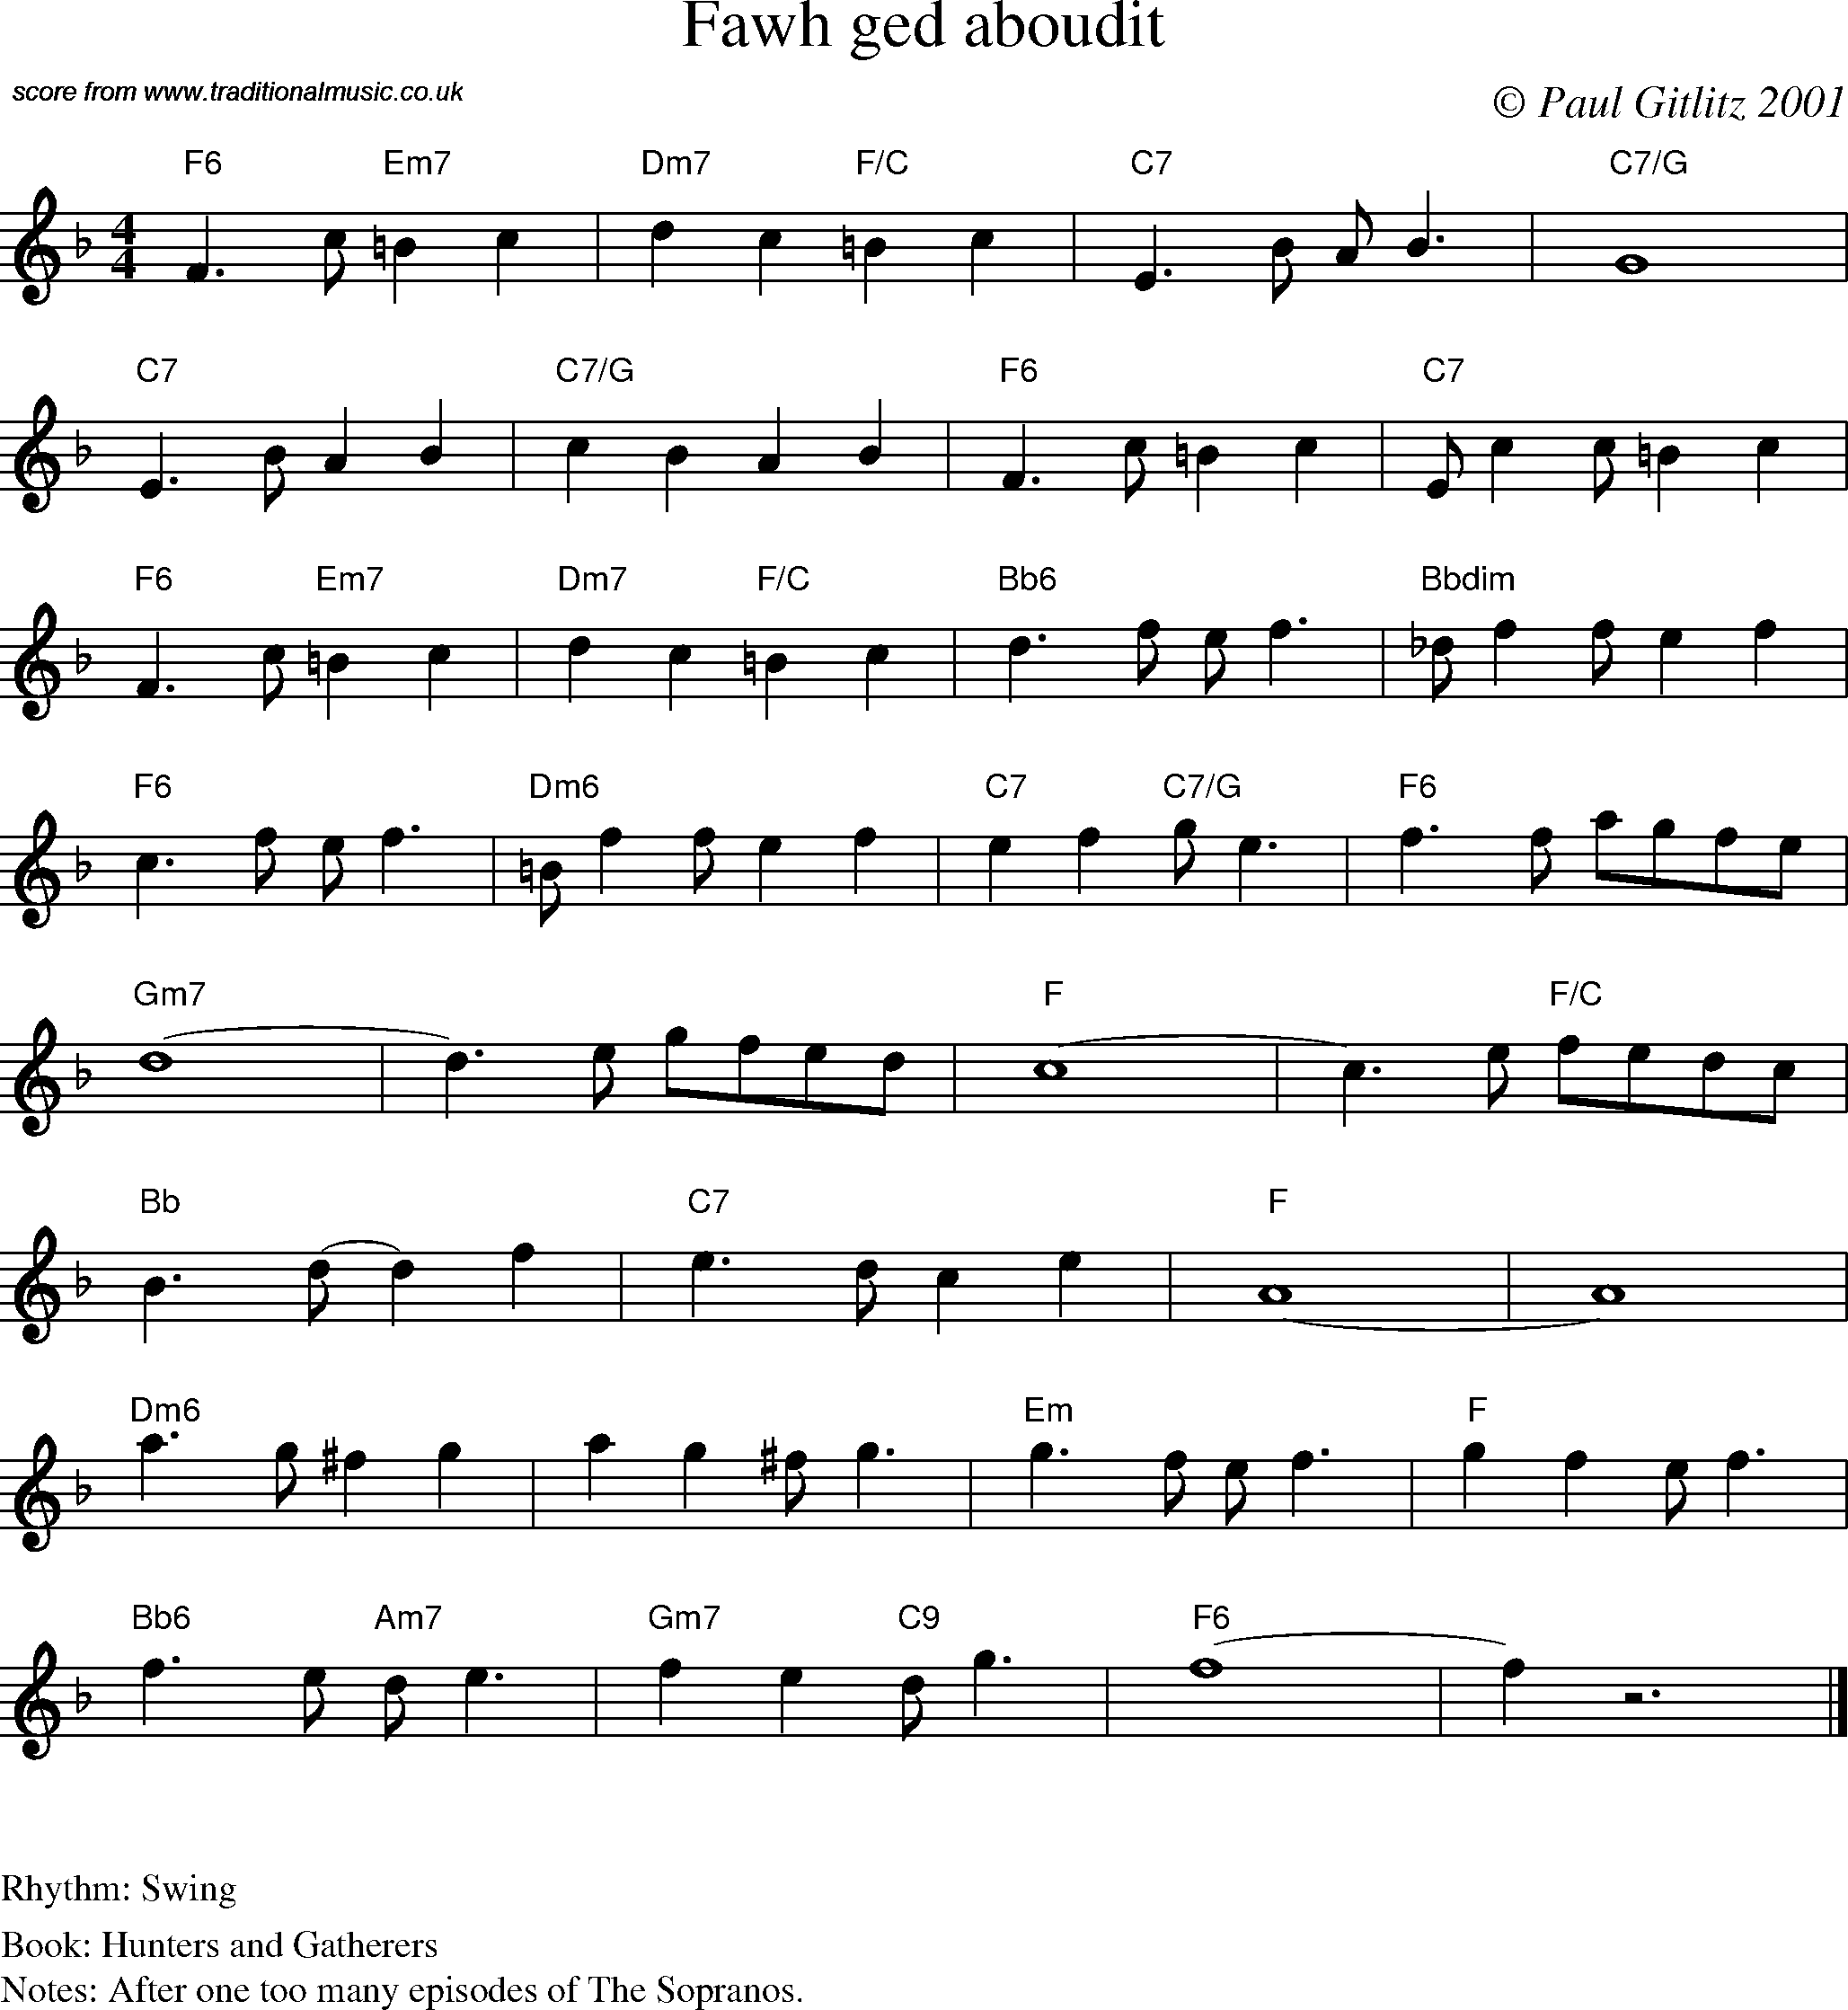 Sheet Music Score for Swing - Fawh ged aboudit